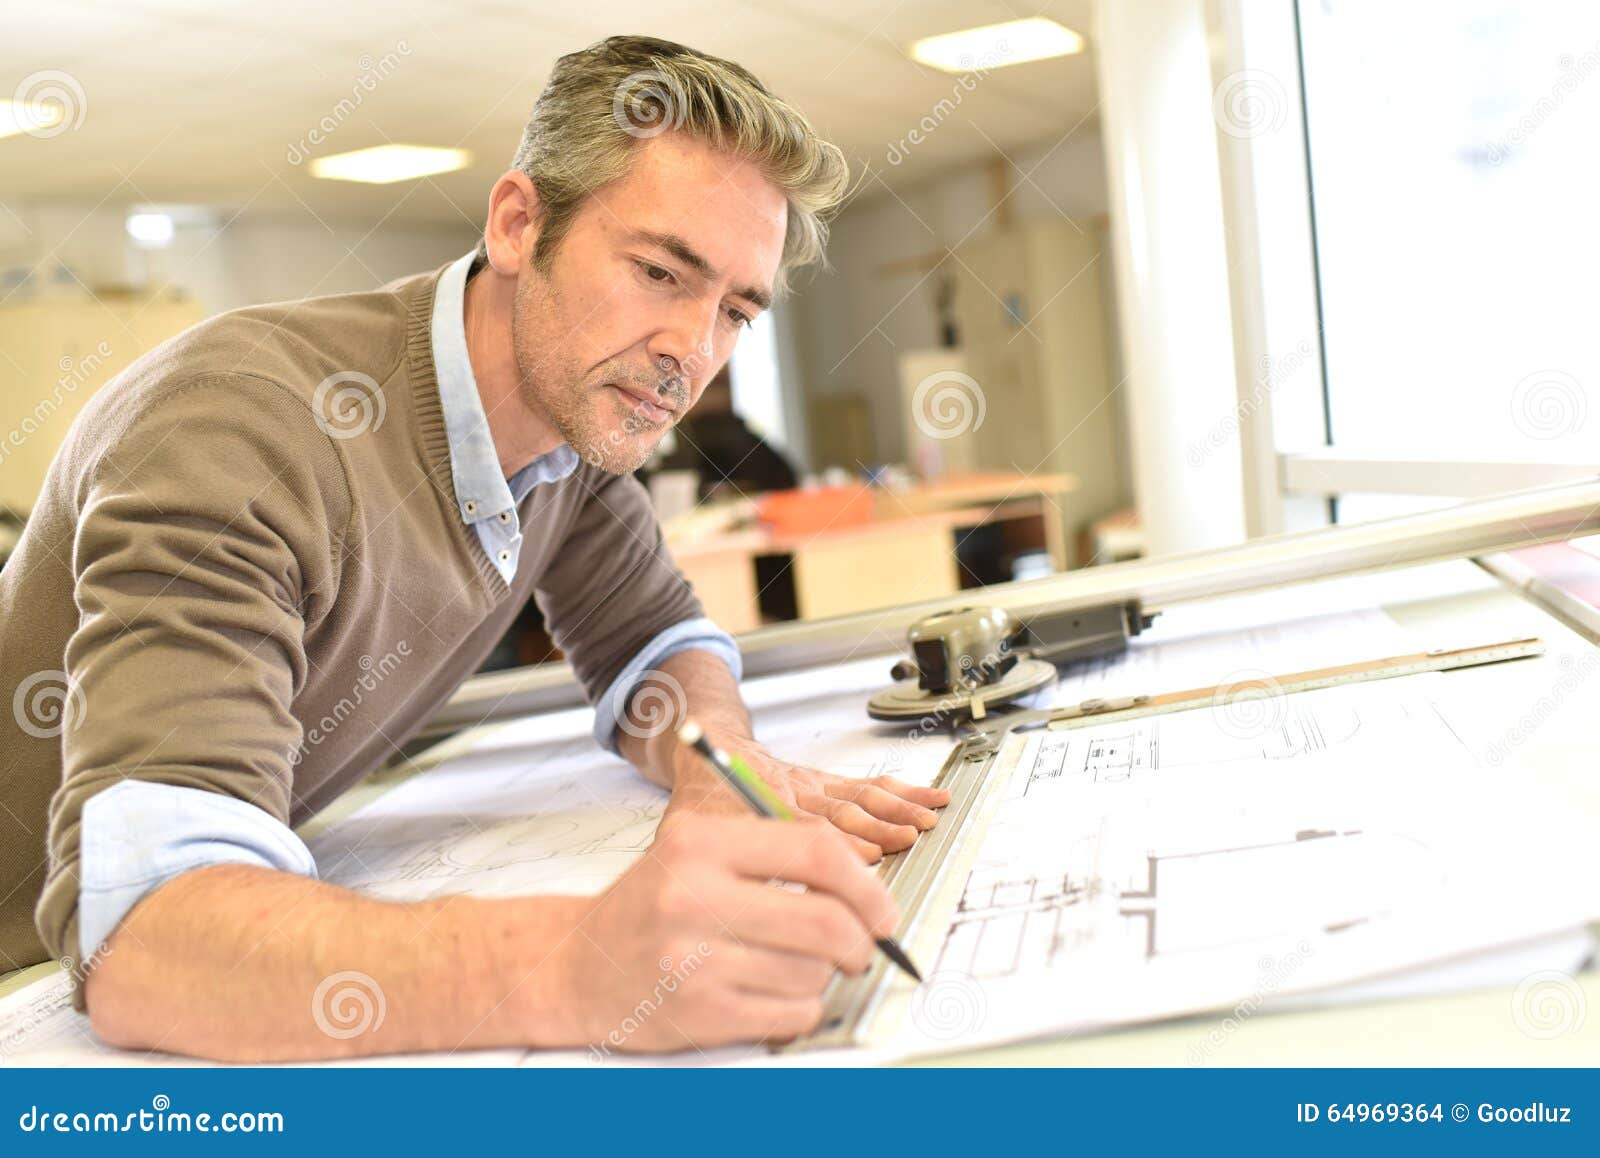 architect working on plans